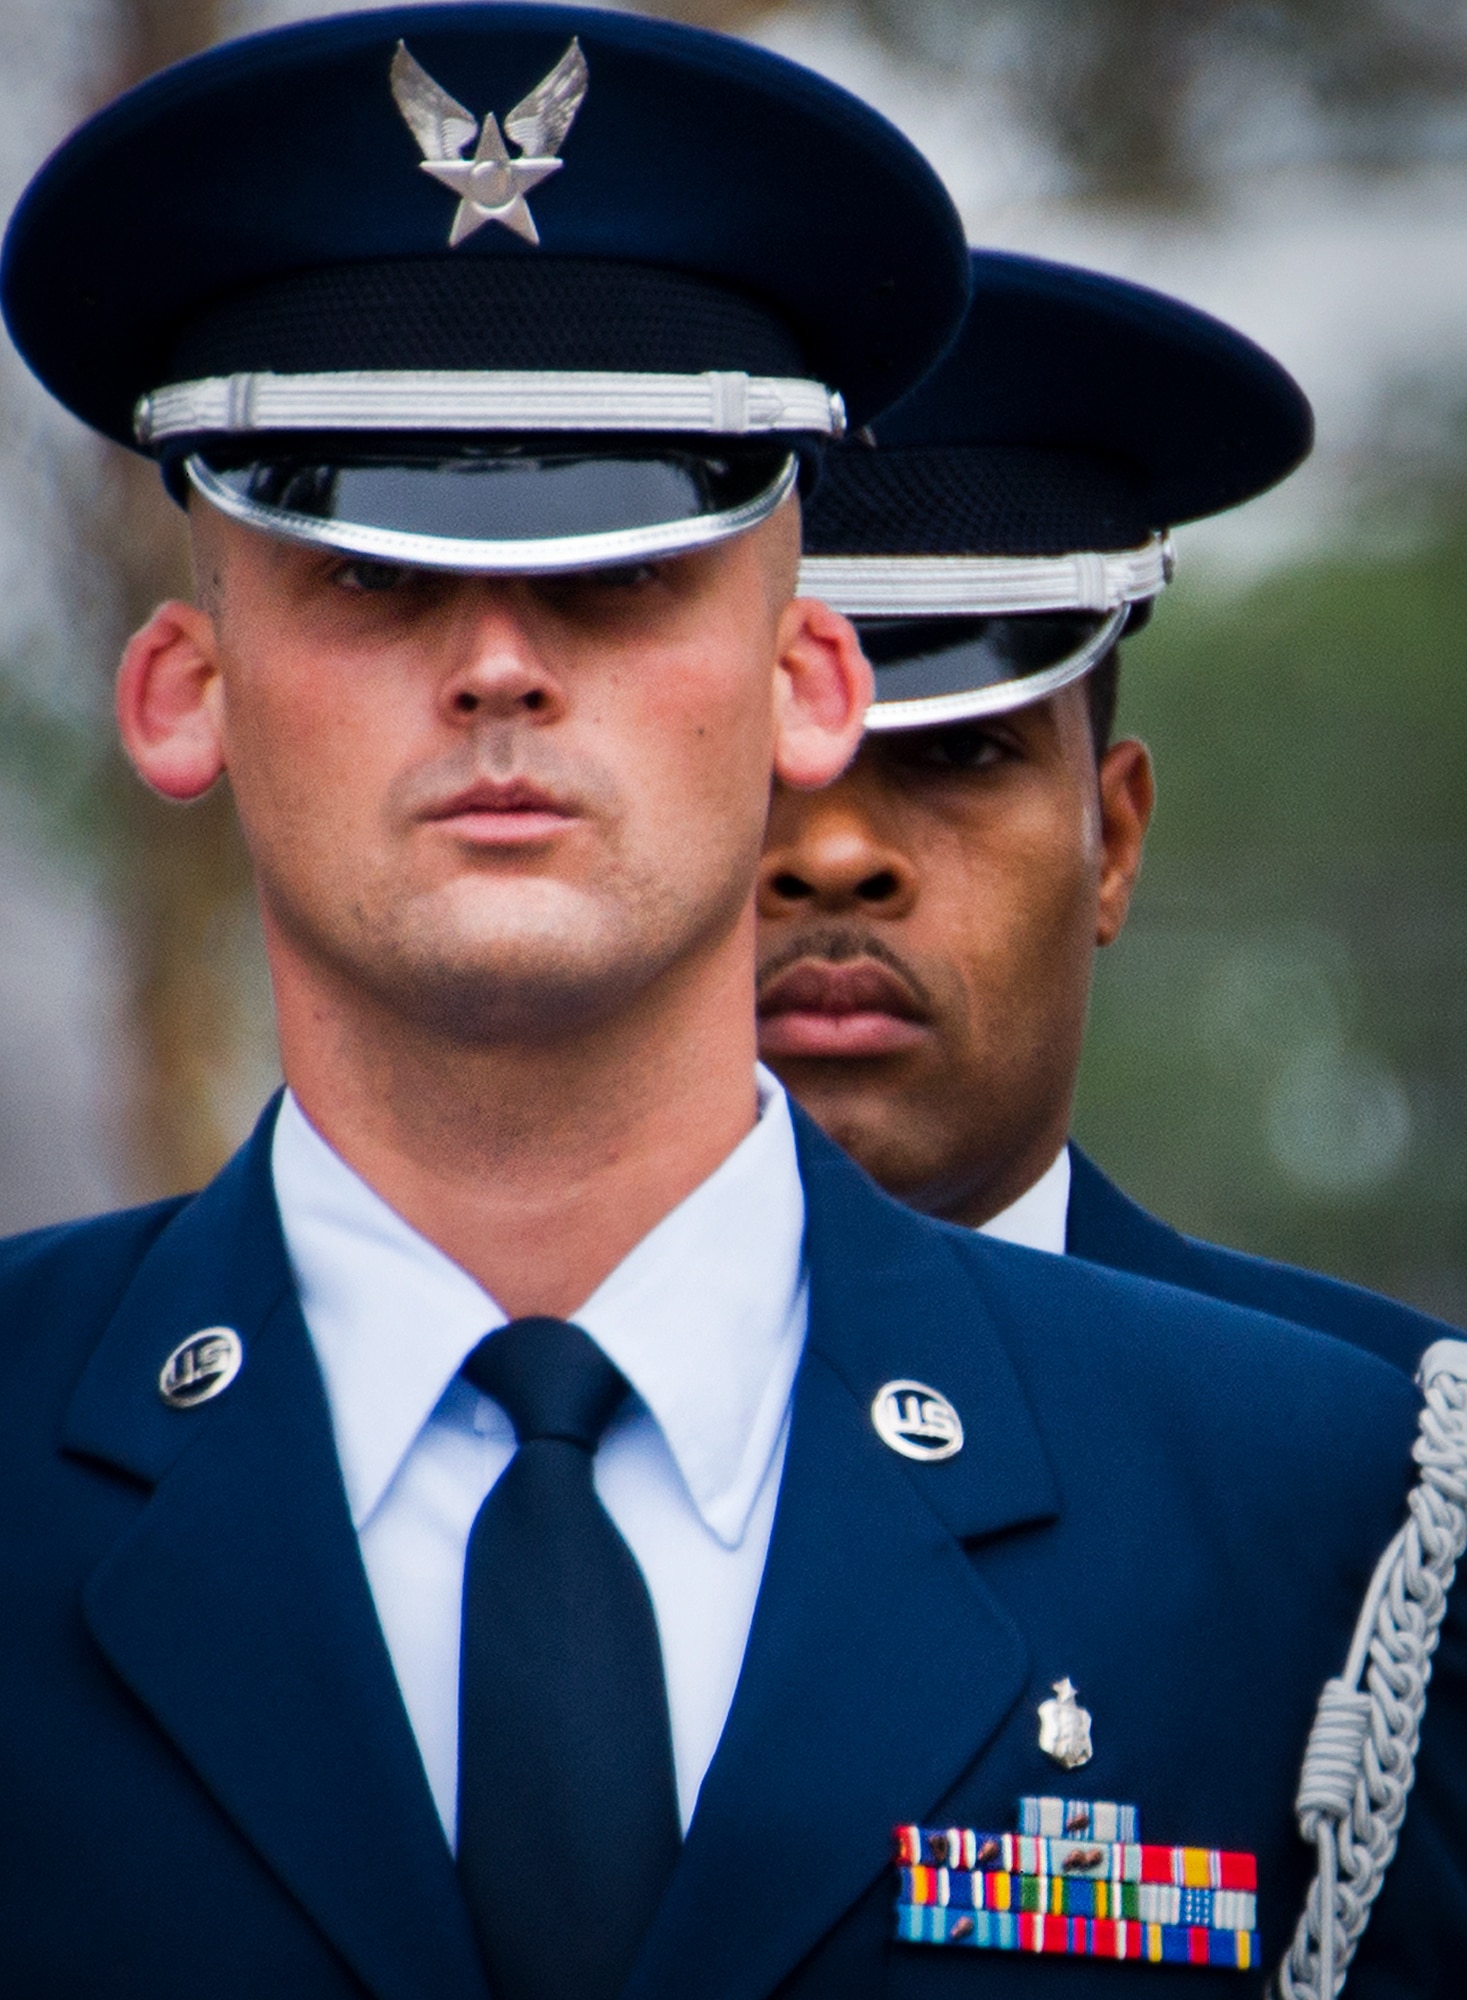 Staff Sgt.s James Rodenberg and William Anderson, of the Eglin Honor Guard, stand at attention during the Senior Airman Josh Santos memorial Jan. 13 at Duke Field.  Santos passed away Nov. 26 from colon cancer.  He was a radio operator with the 711th Special Operations Squadron.  During the memorial, it was announced the Duke Field gym would be renamed Santos Strength in his honor.  (U.S. Air Force photo/Tech. Sgt. Samuel King Jr.)